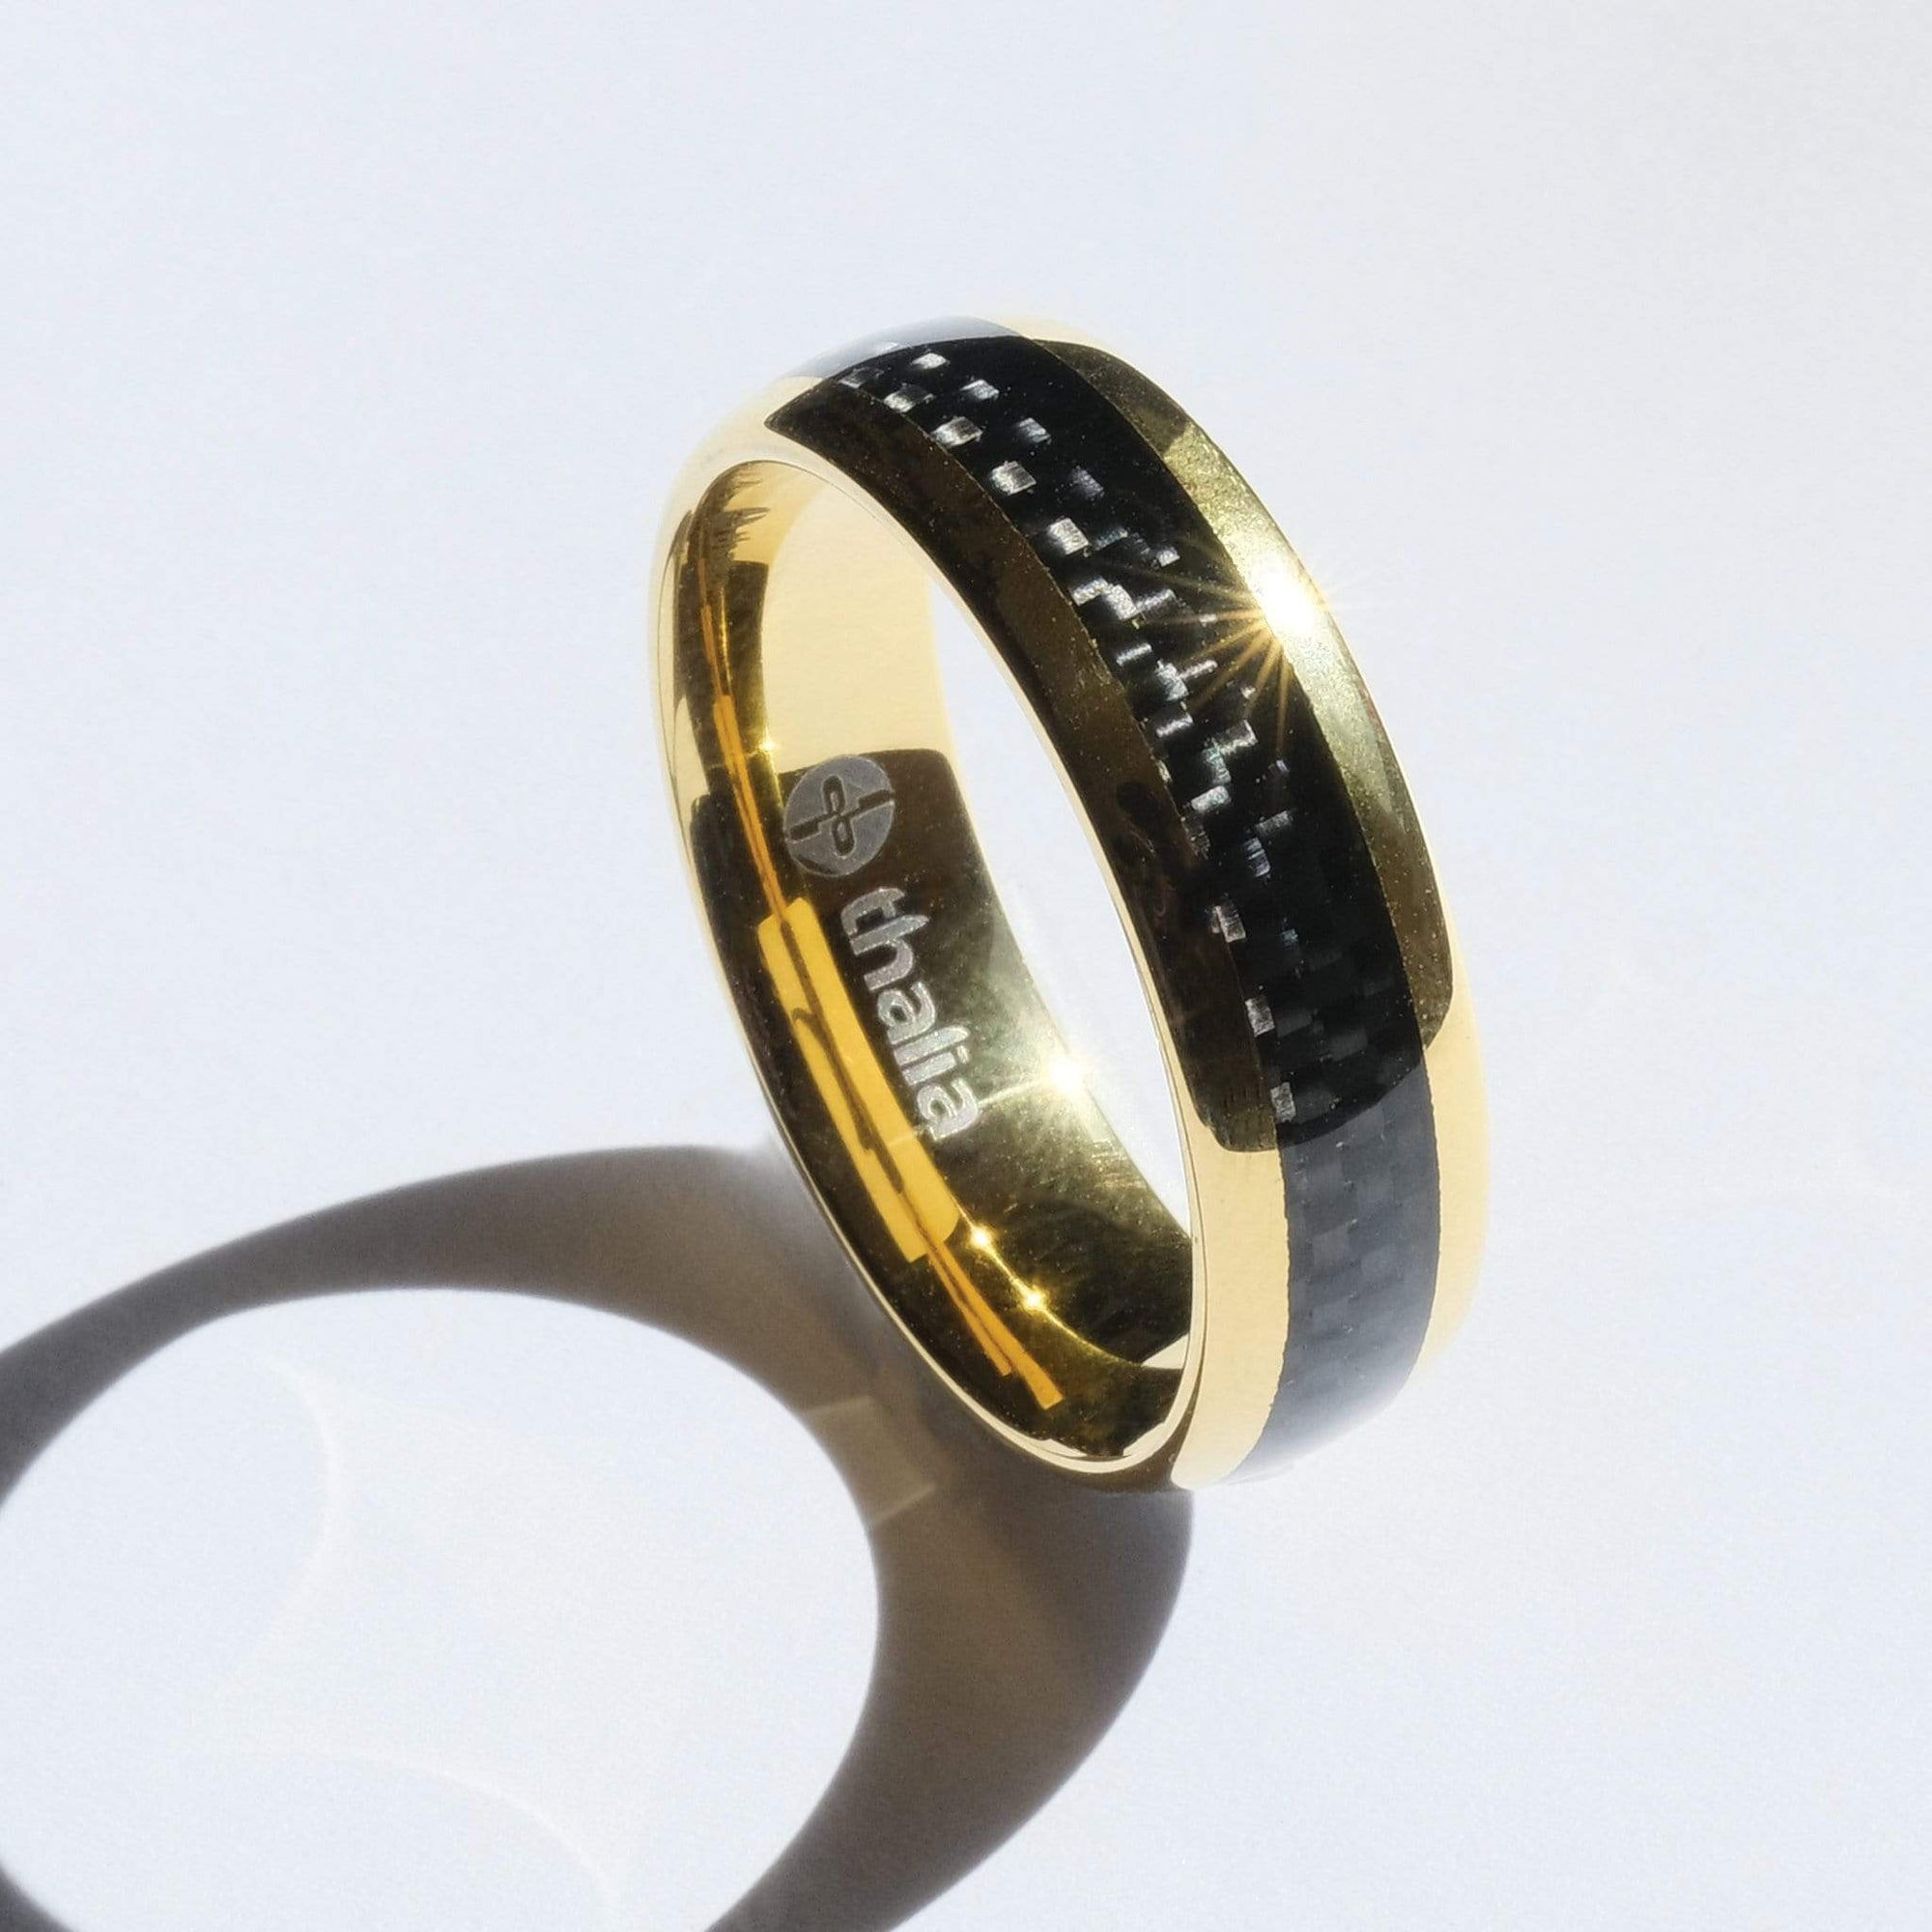 8MM Men's Tungsten Carbide Ring Wedding Band W/Carbon Fiber Inaly sizes 5  to 15